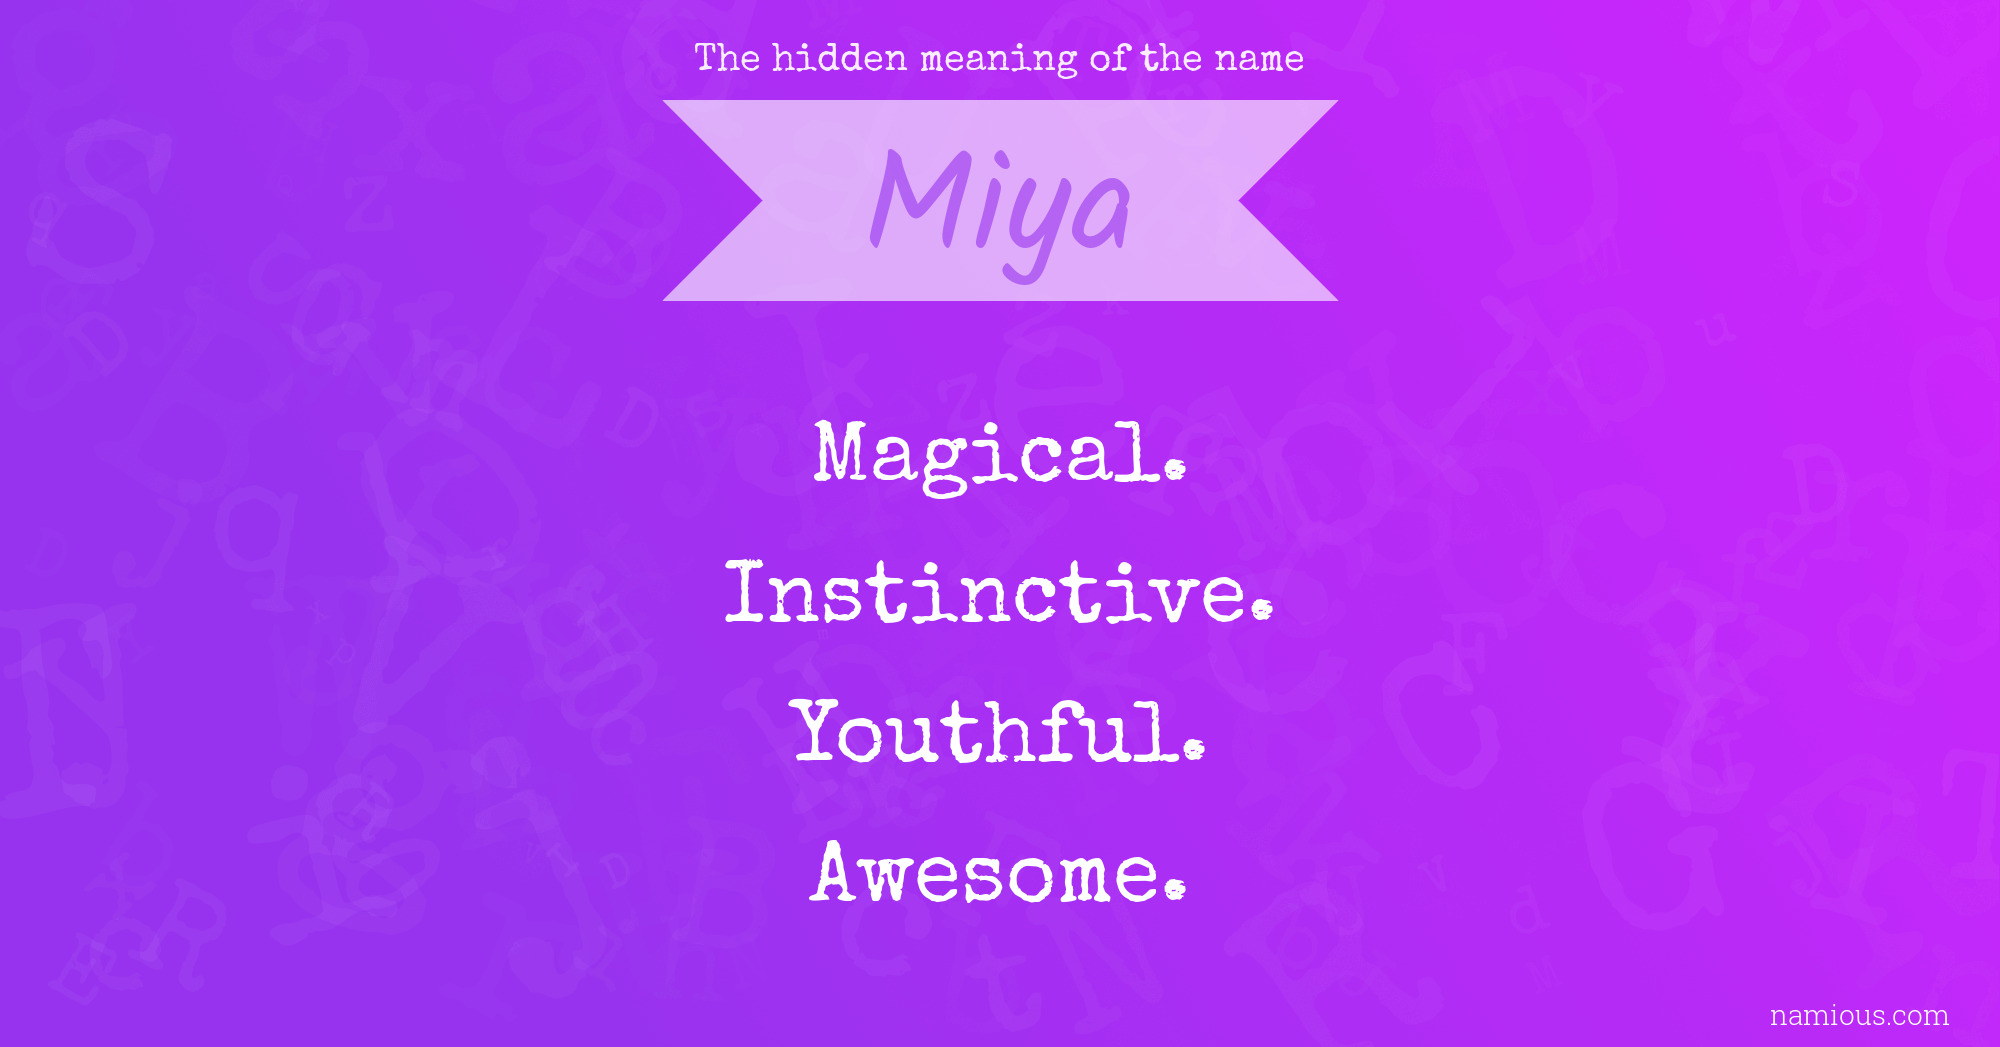 The hidden meaning of the name Miya